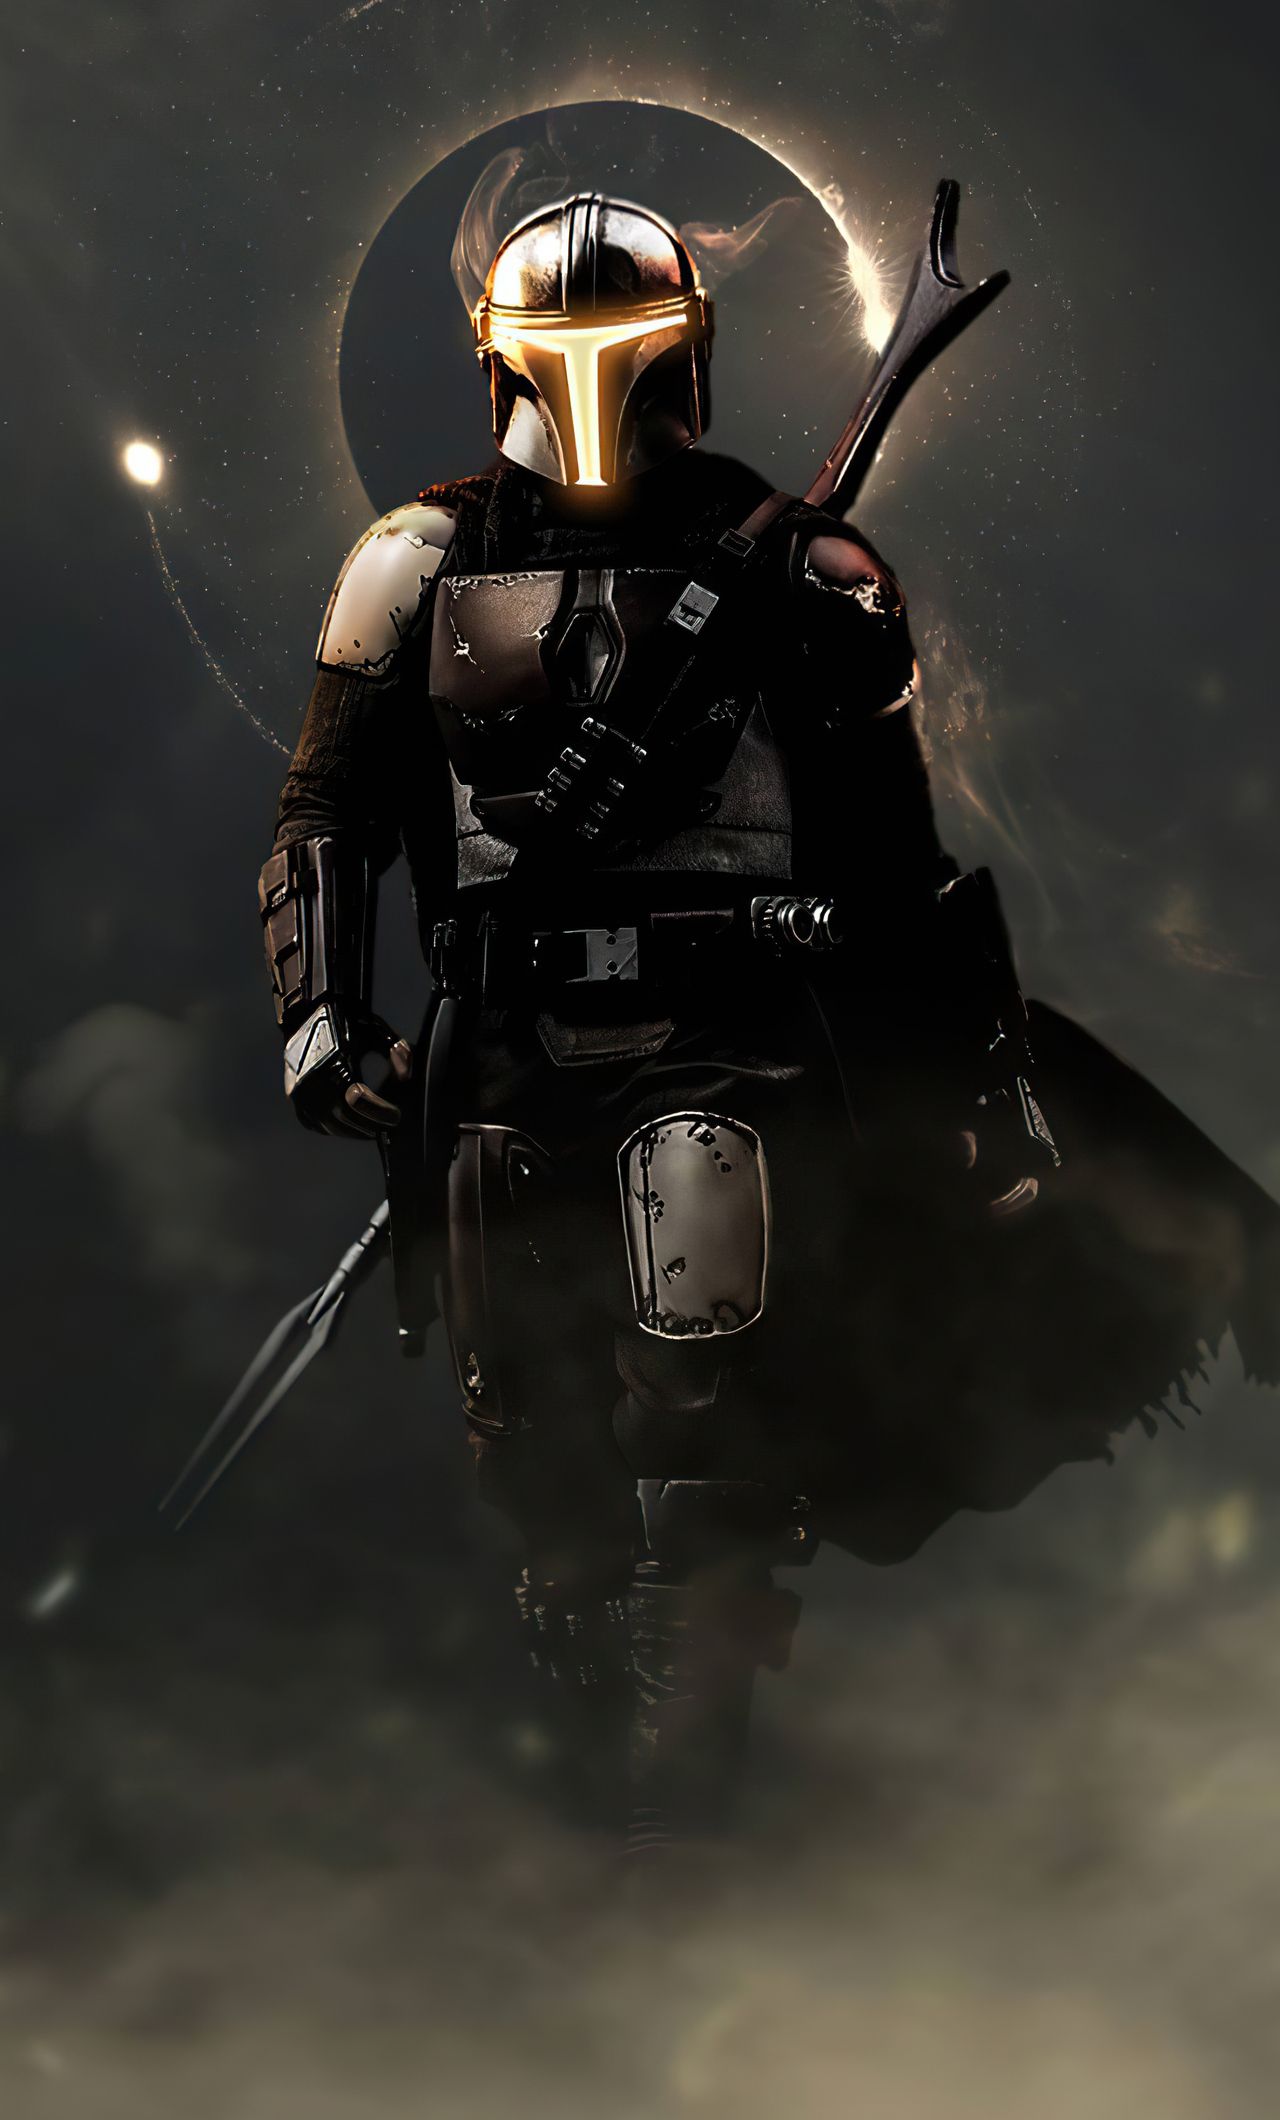 1280x2120 The Mandalorian Season 2 4k 2021 iPhone 6+ HD 4k Wallpapers, Image, Backgrounds, Photos and Pictures